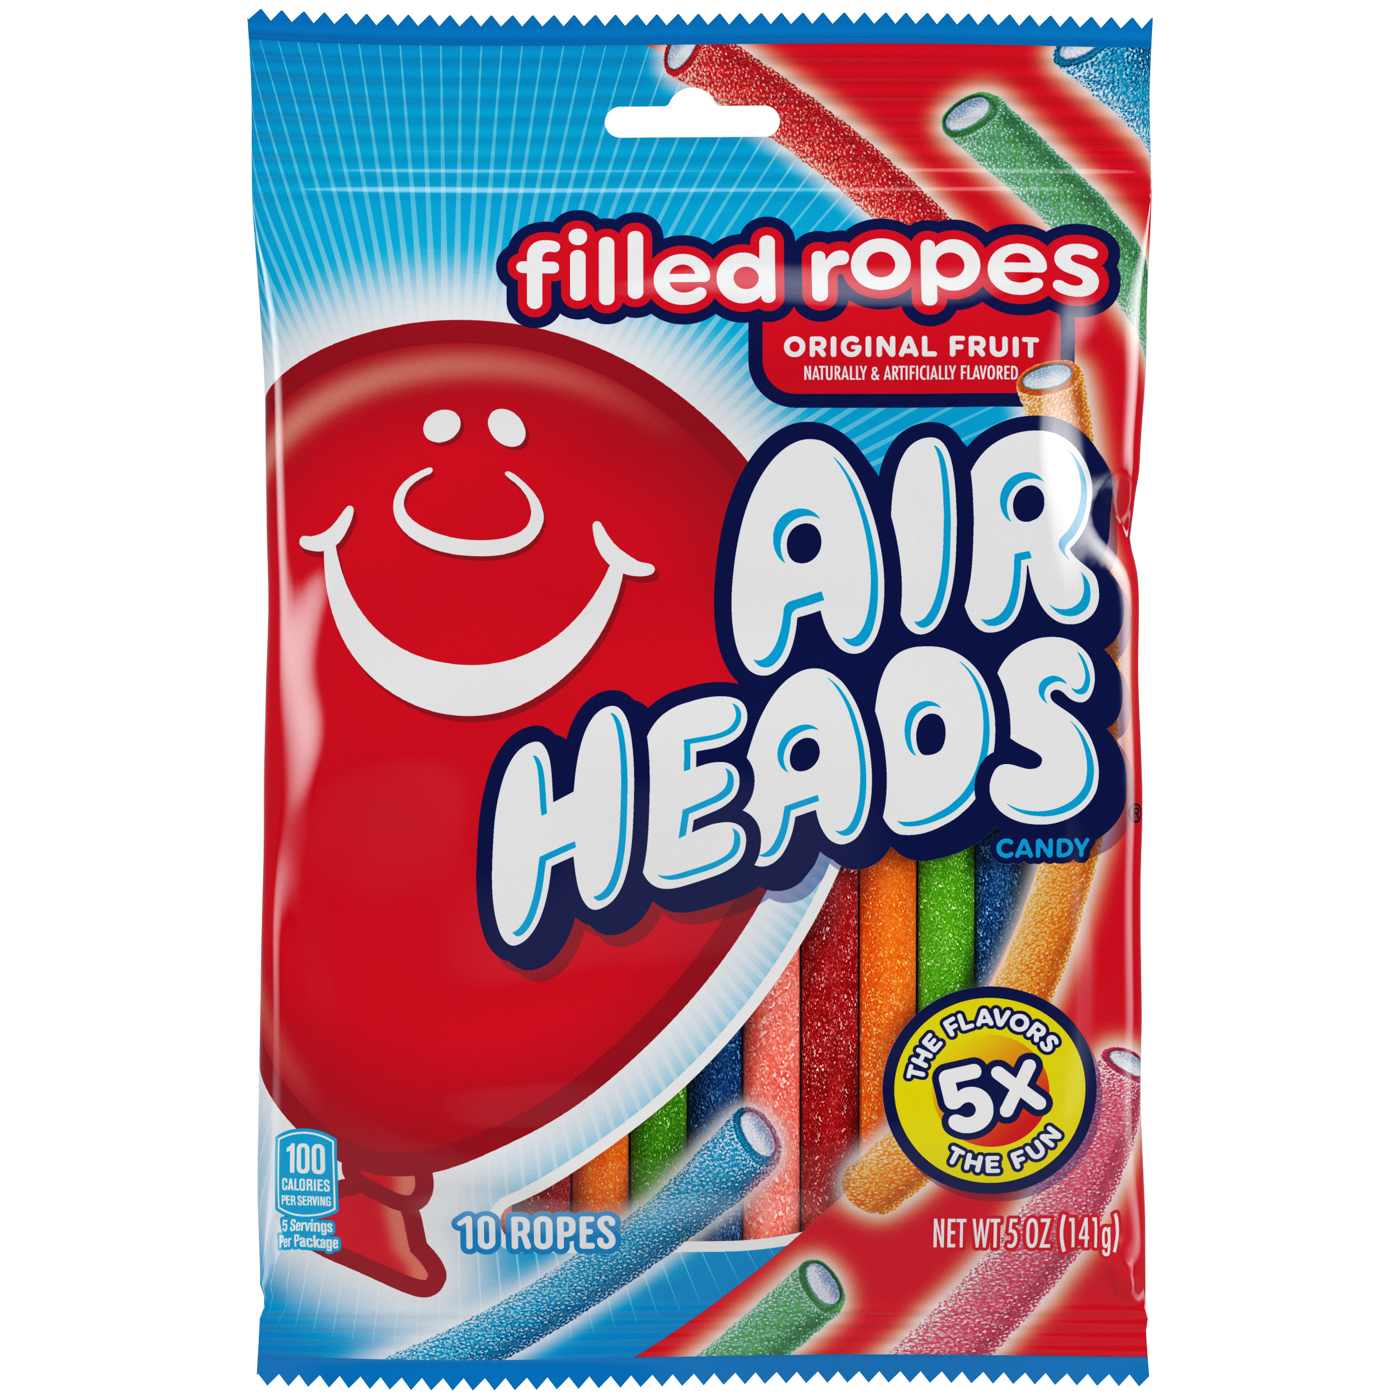 Airheads Original Fruit Candy filled Ropes; image 1 of 2